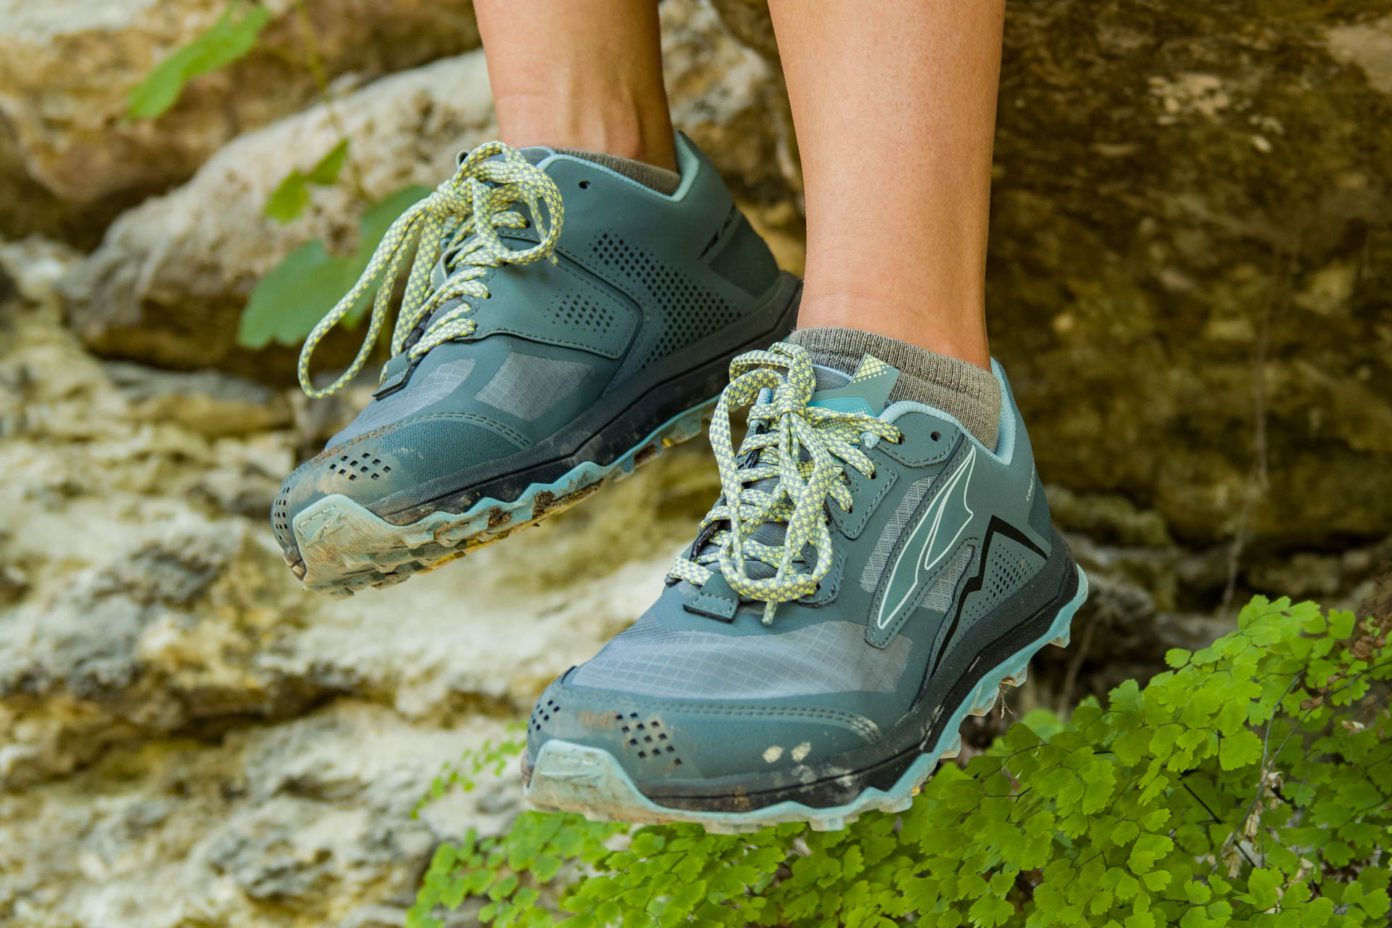 Altra Lone Peak 5: Hiking Shoes that Make Your Feet Happy